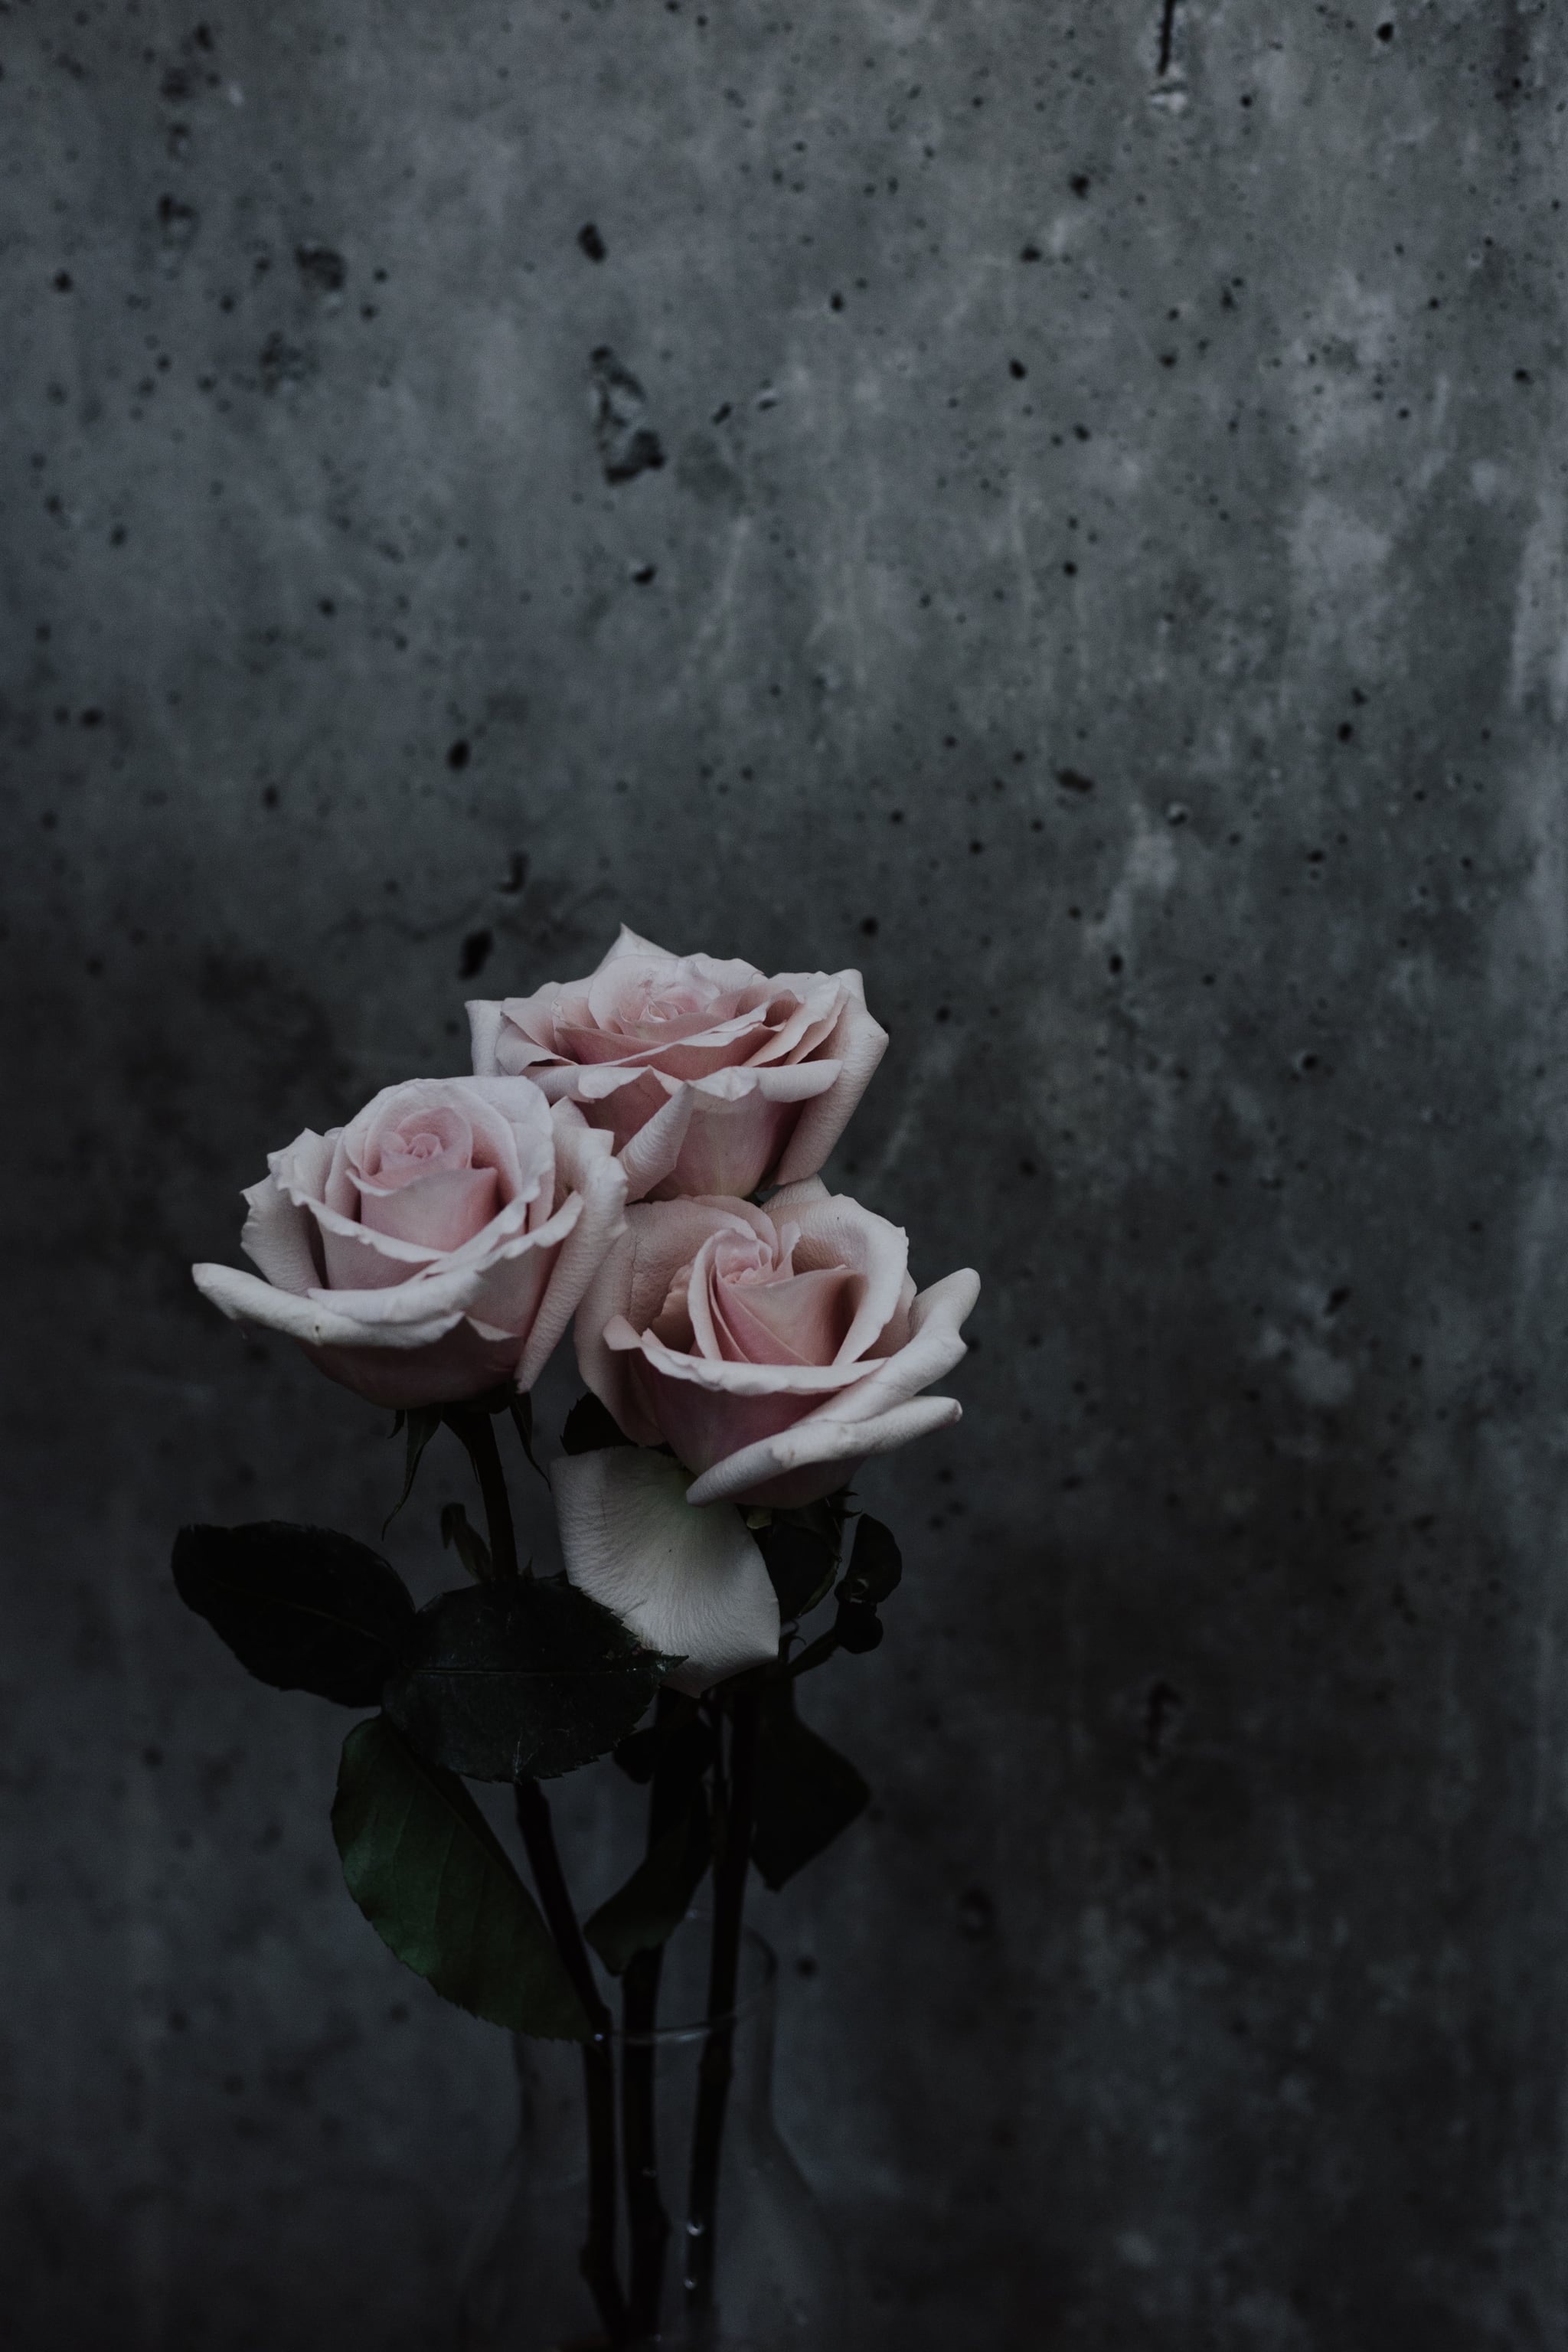 A vase of pink roses against a concrete wall - Roses, gray